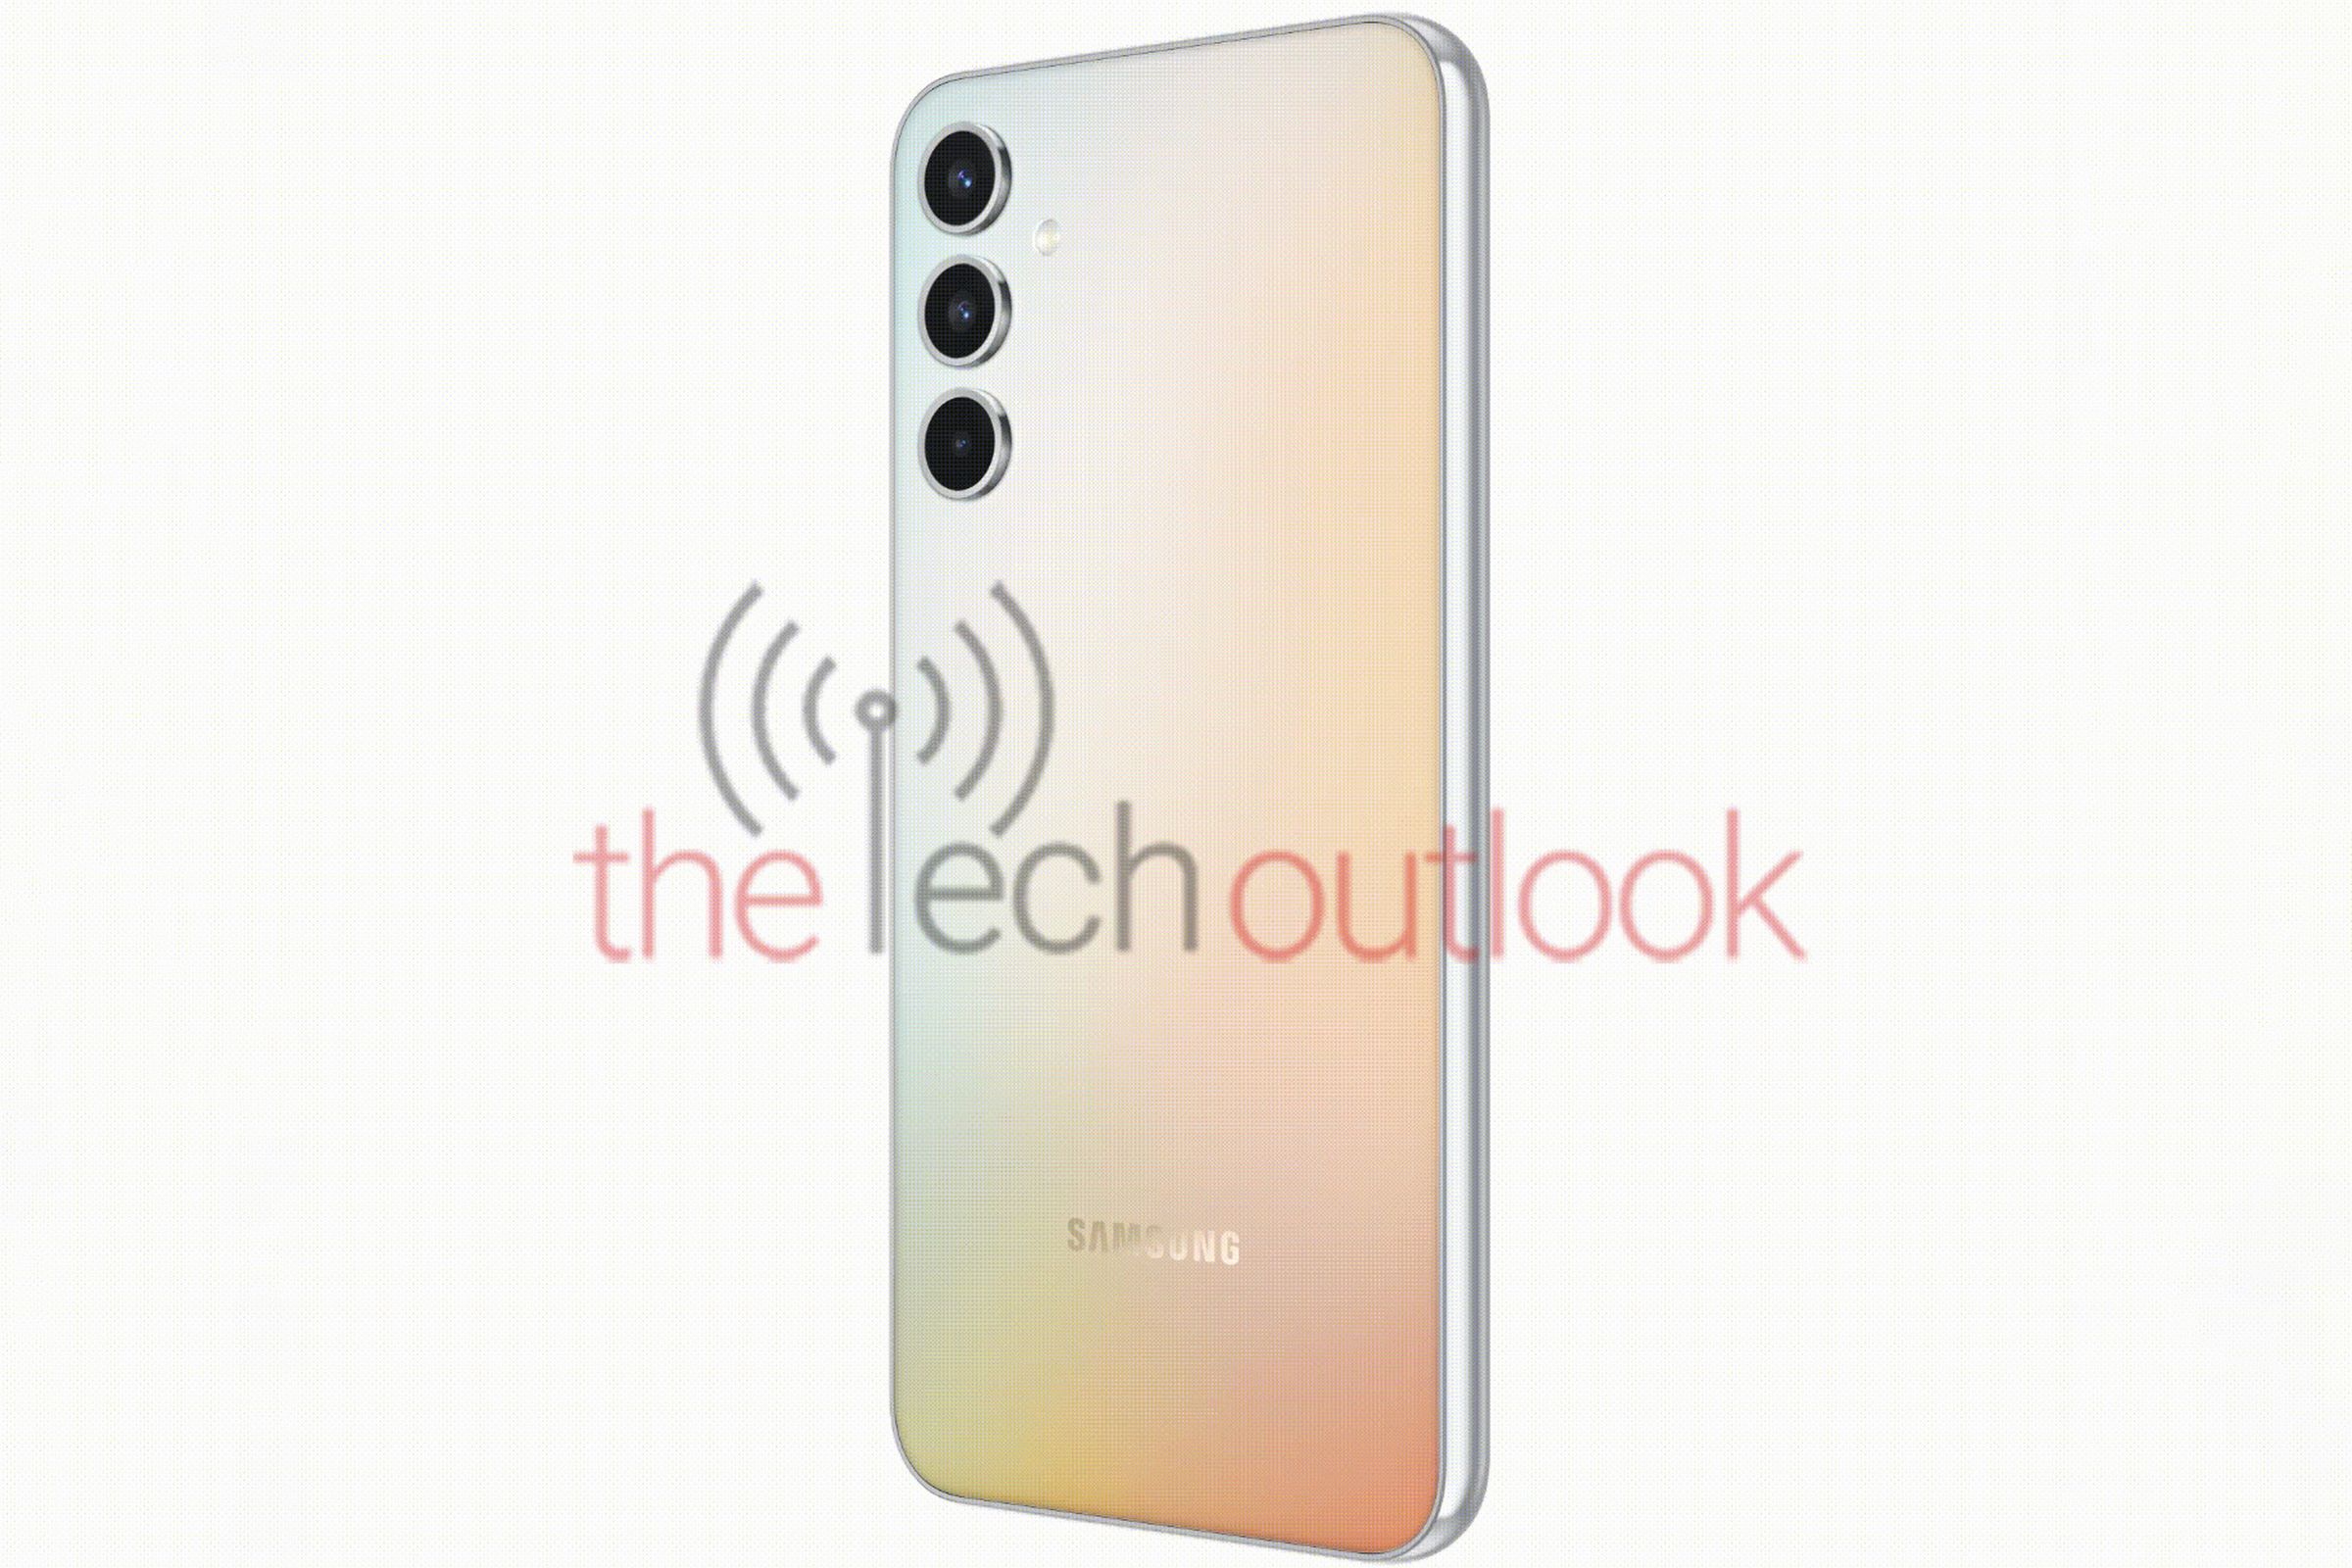 Render of Samsung A34 phone showing pearlescent back panel and triple-camera array with Tech Outlook watermark over top.